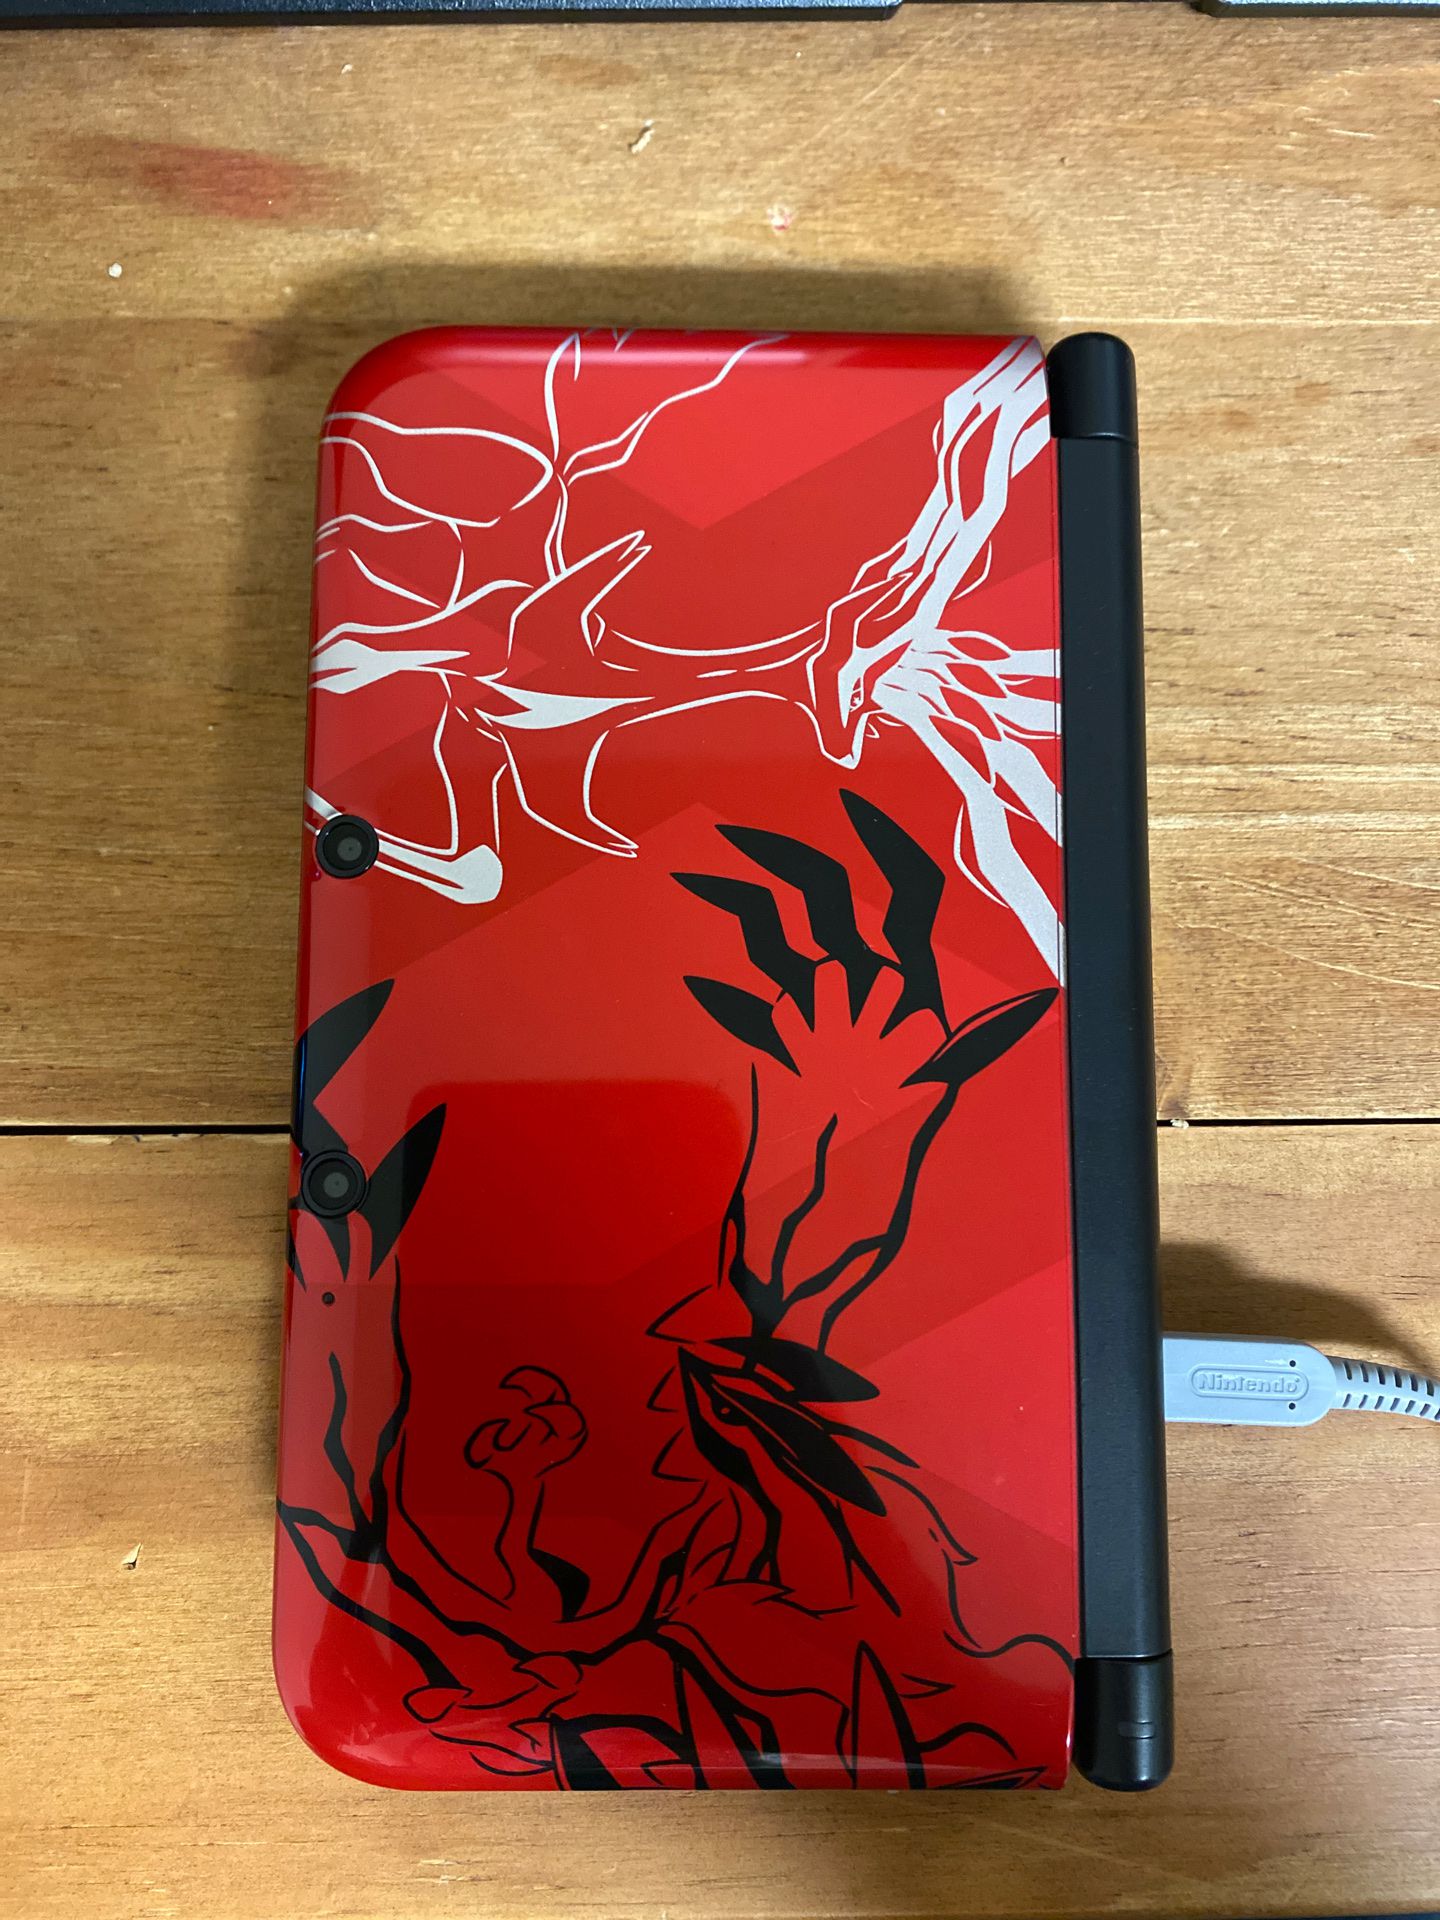 3DS XL Special Edition Pokémon X/Y Red with case